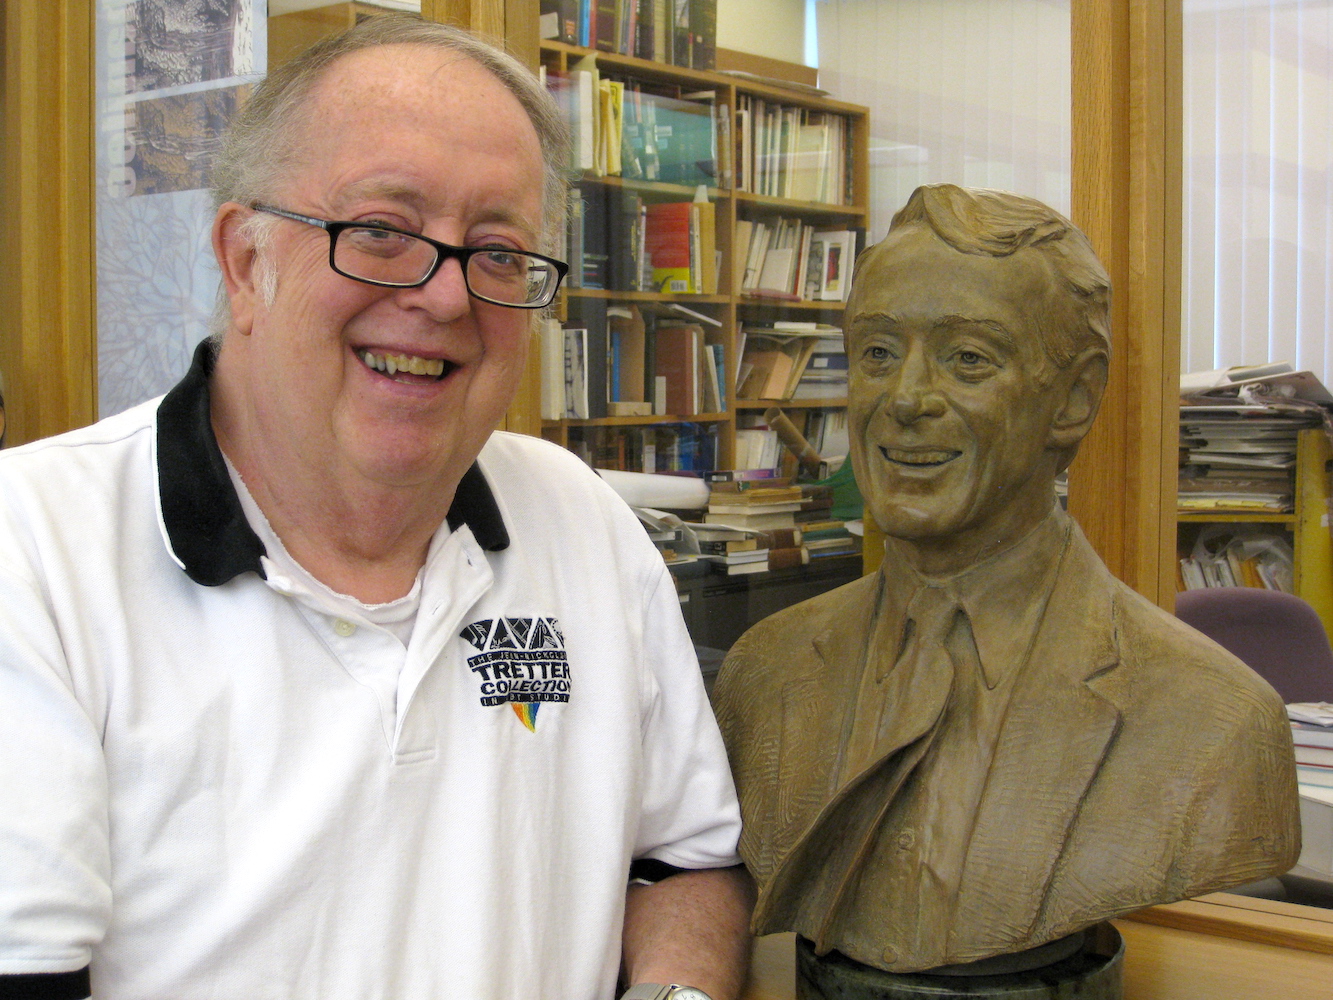 Jean-Nickolaus Tretter with a bust of Harvey Milk. Photo courtesy of Jean Tretter.